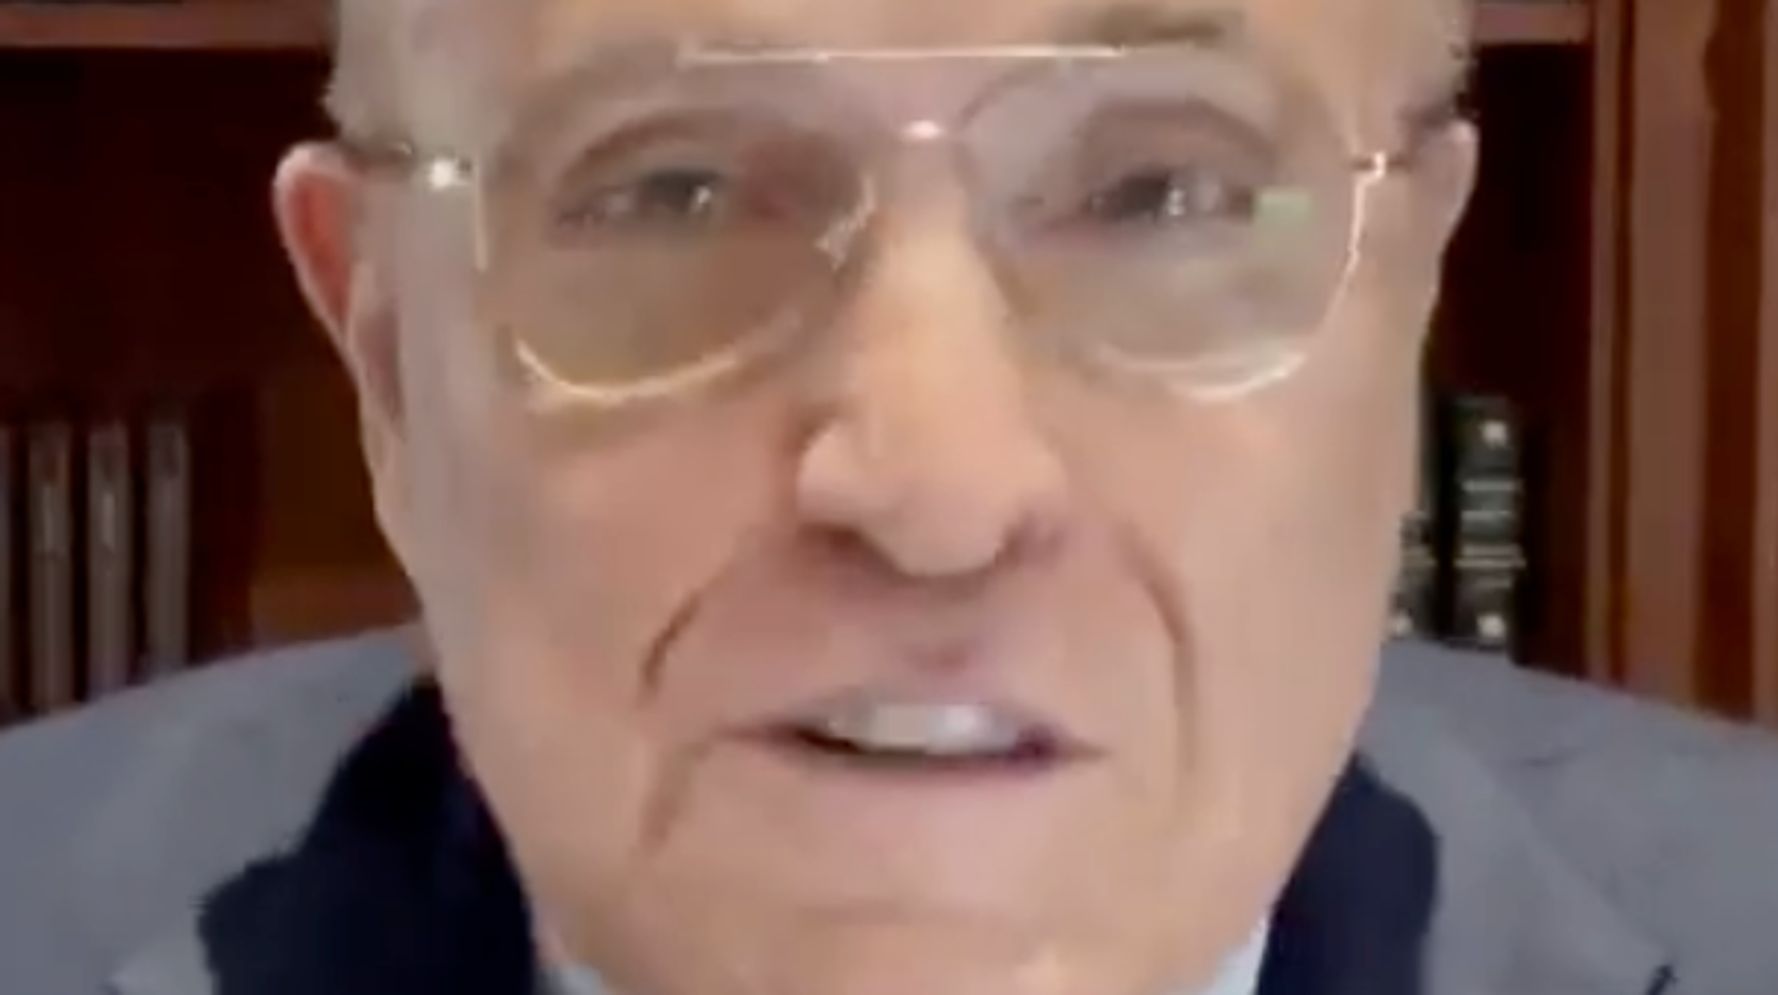 Rudy Giuliani Resorts To Selling Cameo Vids For $199 Each